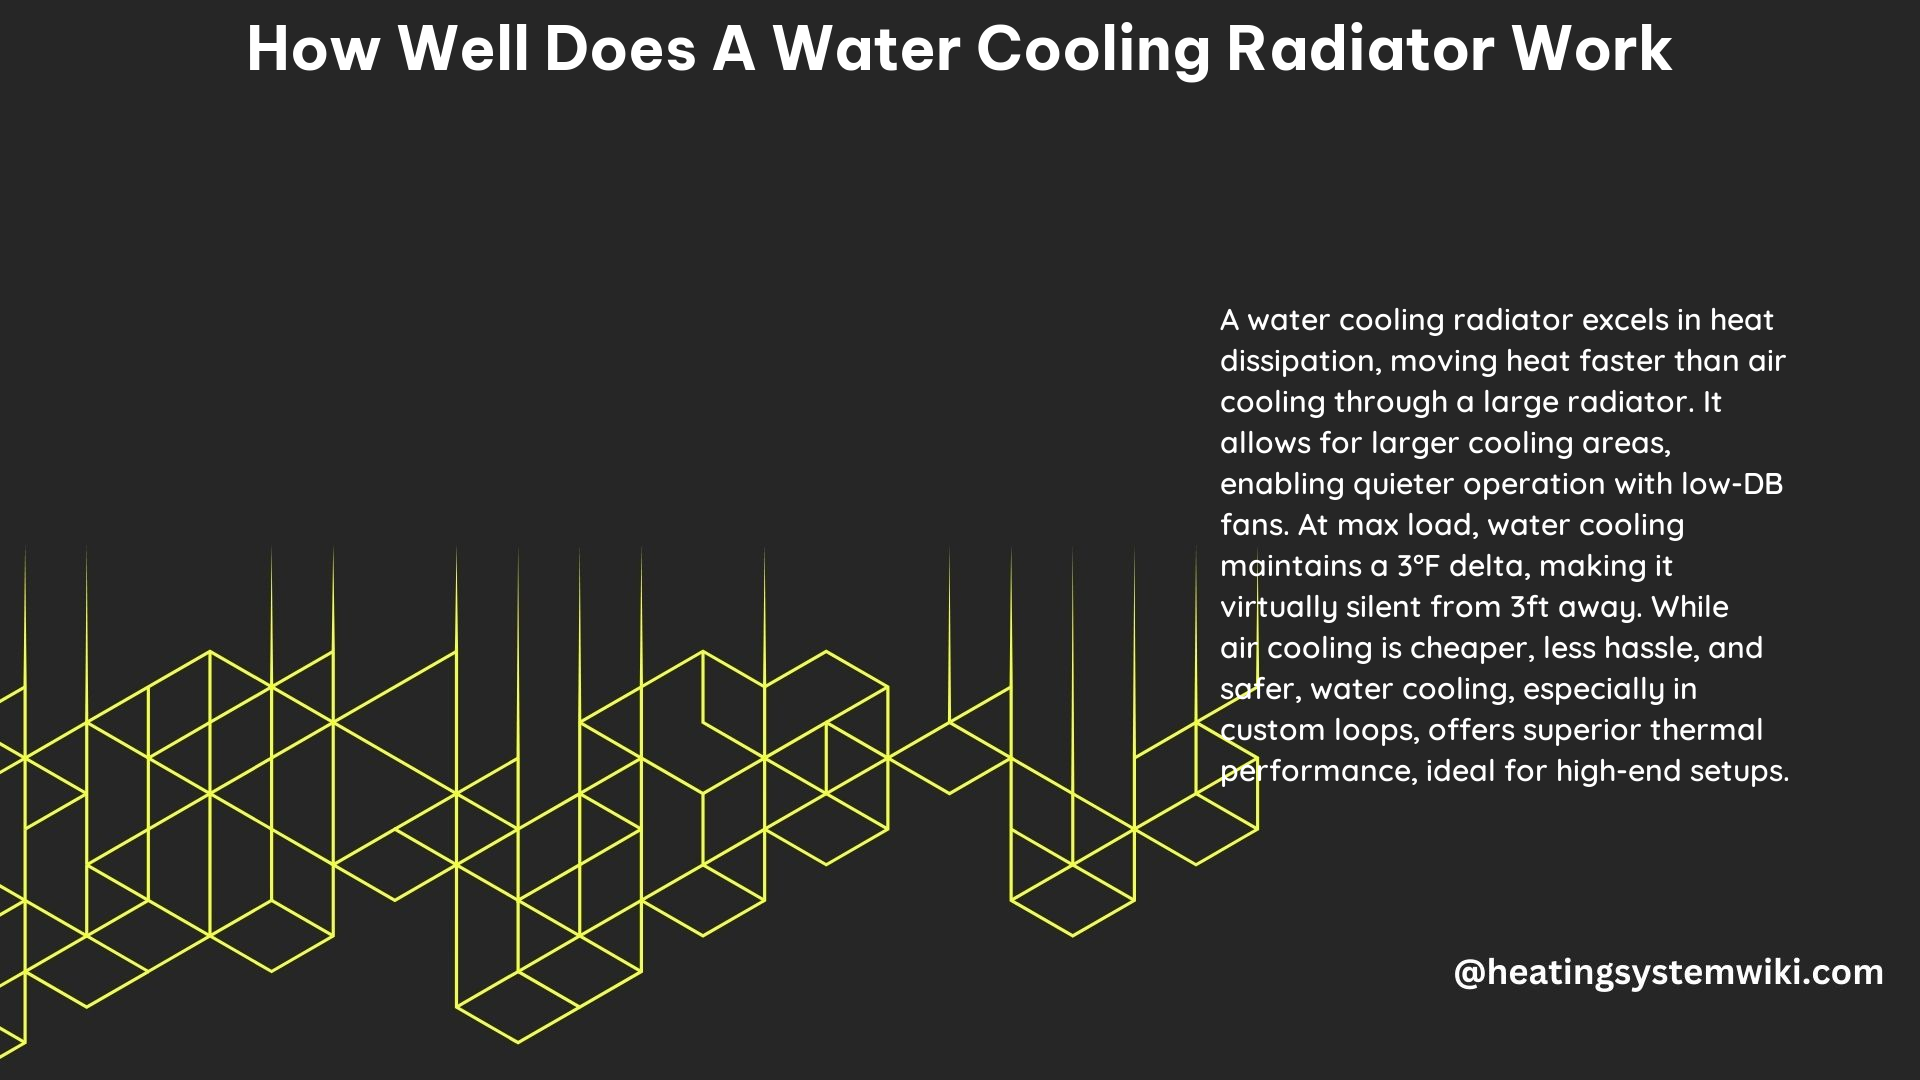 How Well Does a Water Cooling Radiator Work